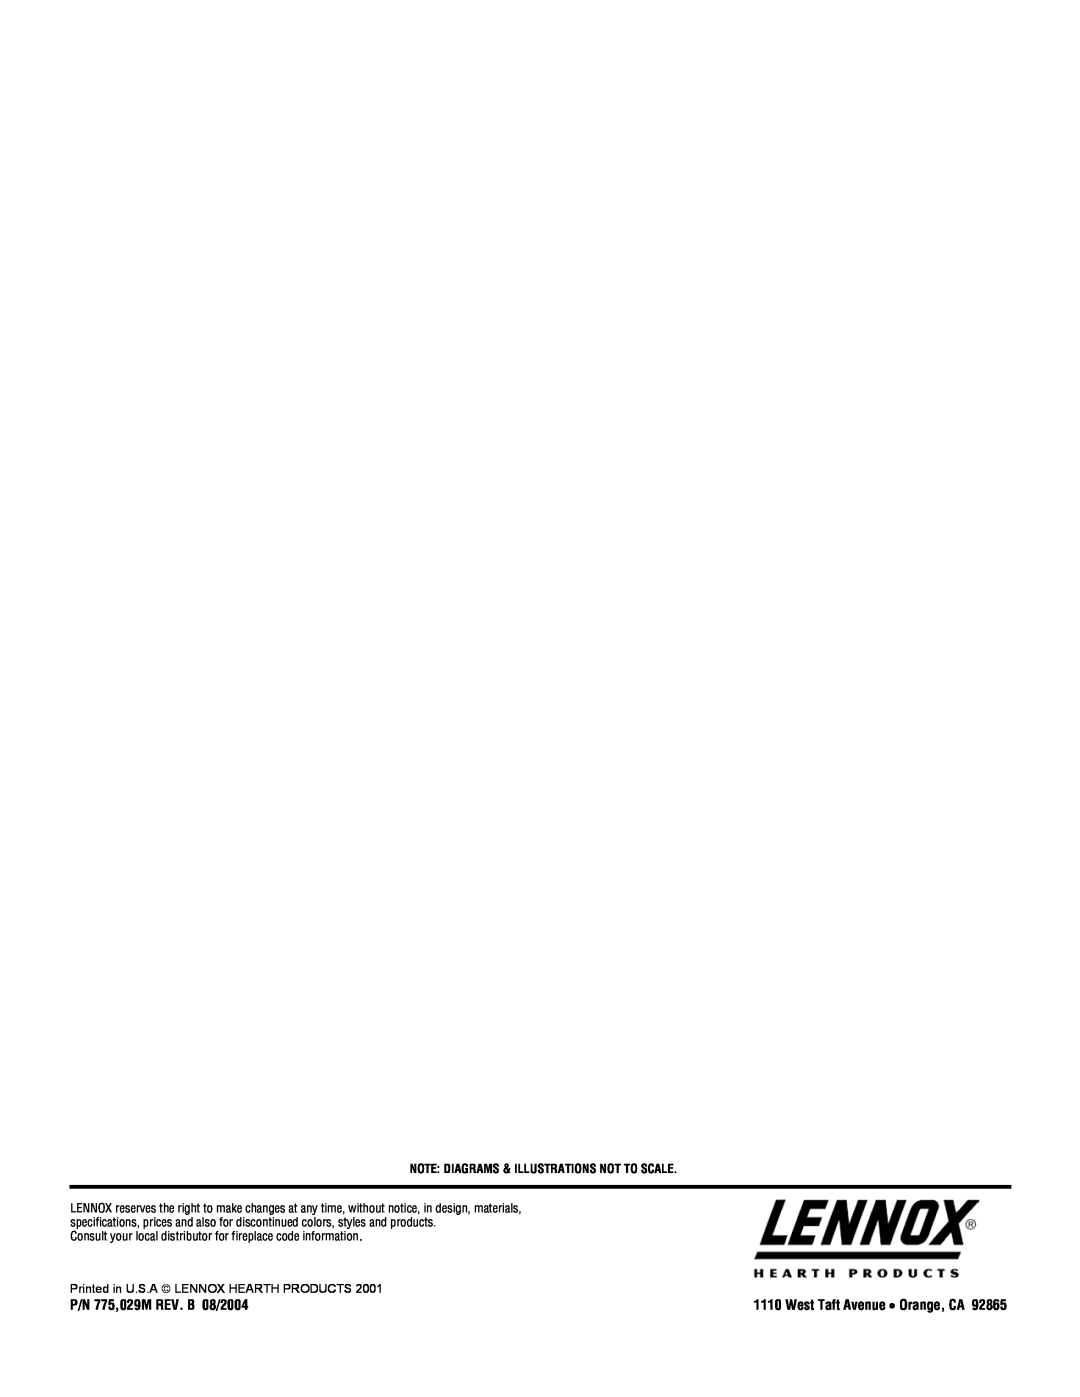 Lennox Hearth L30 DVF-2 operation manual P/N 775,029M REV. B 08/2004, Note Diagrams & Illustrations Not To Scale 